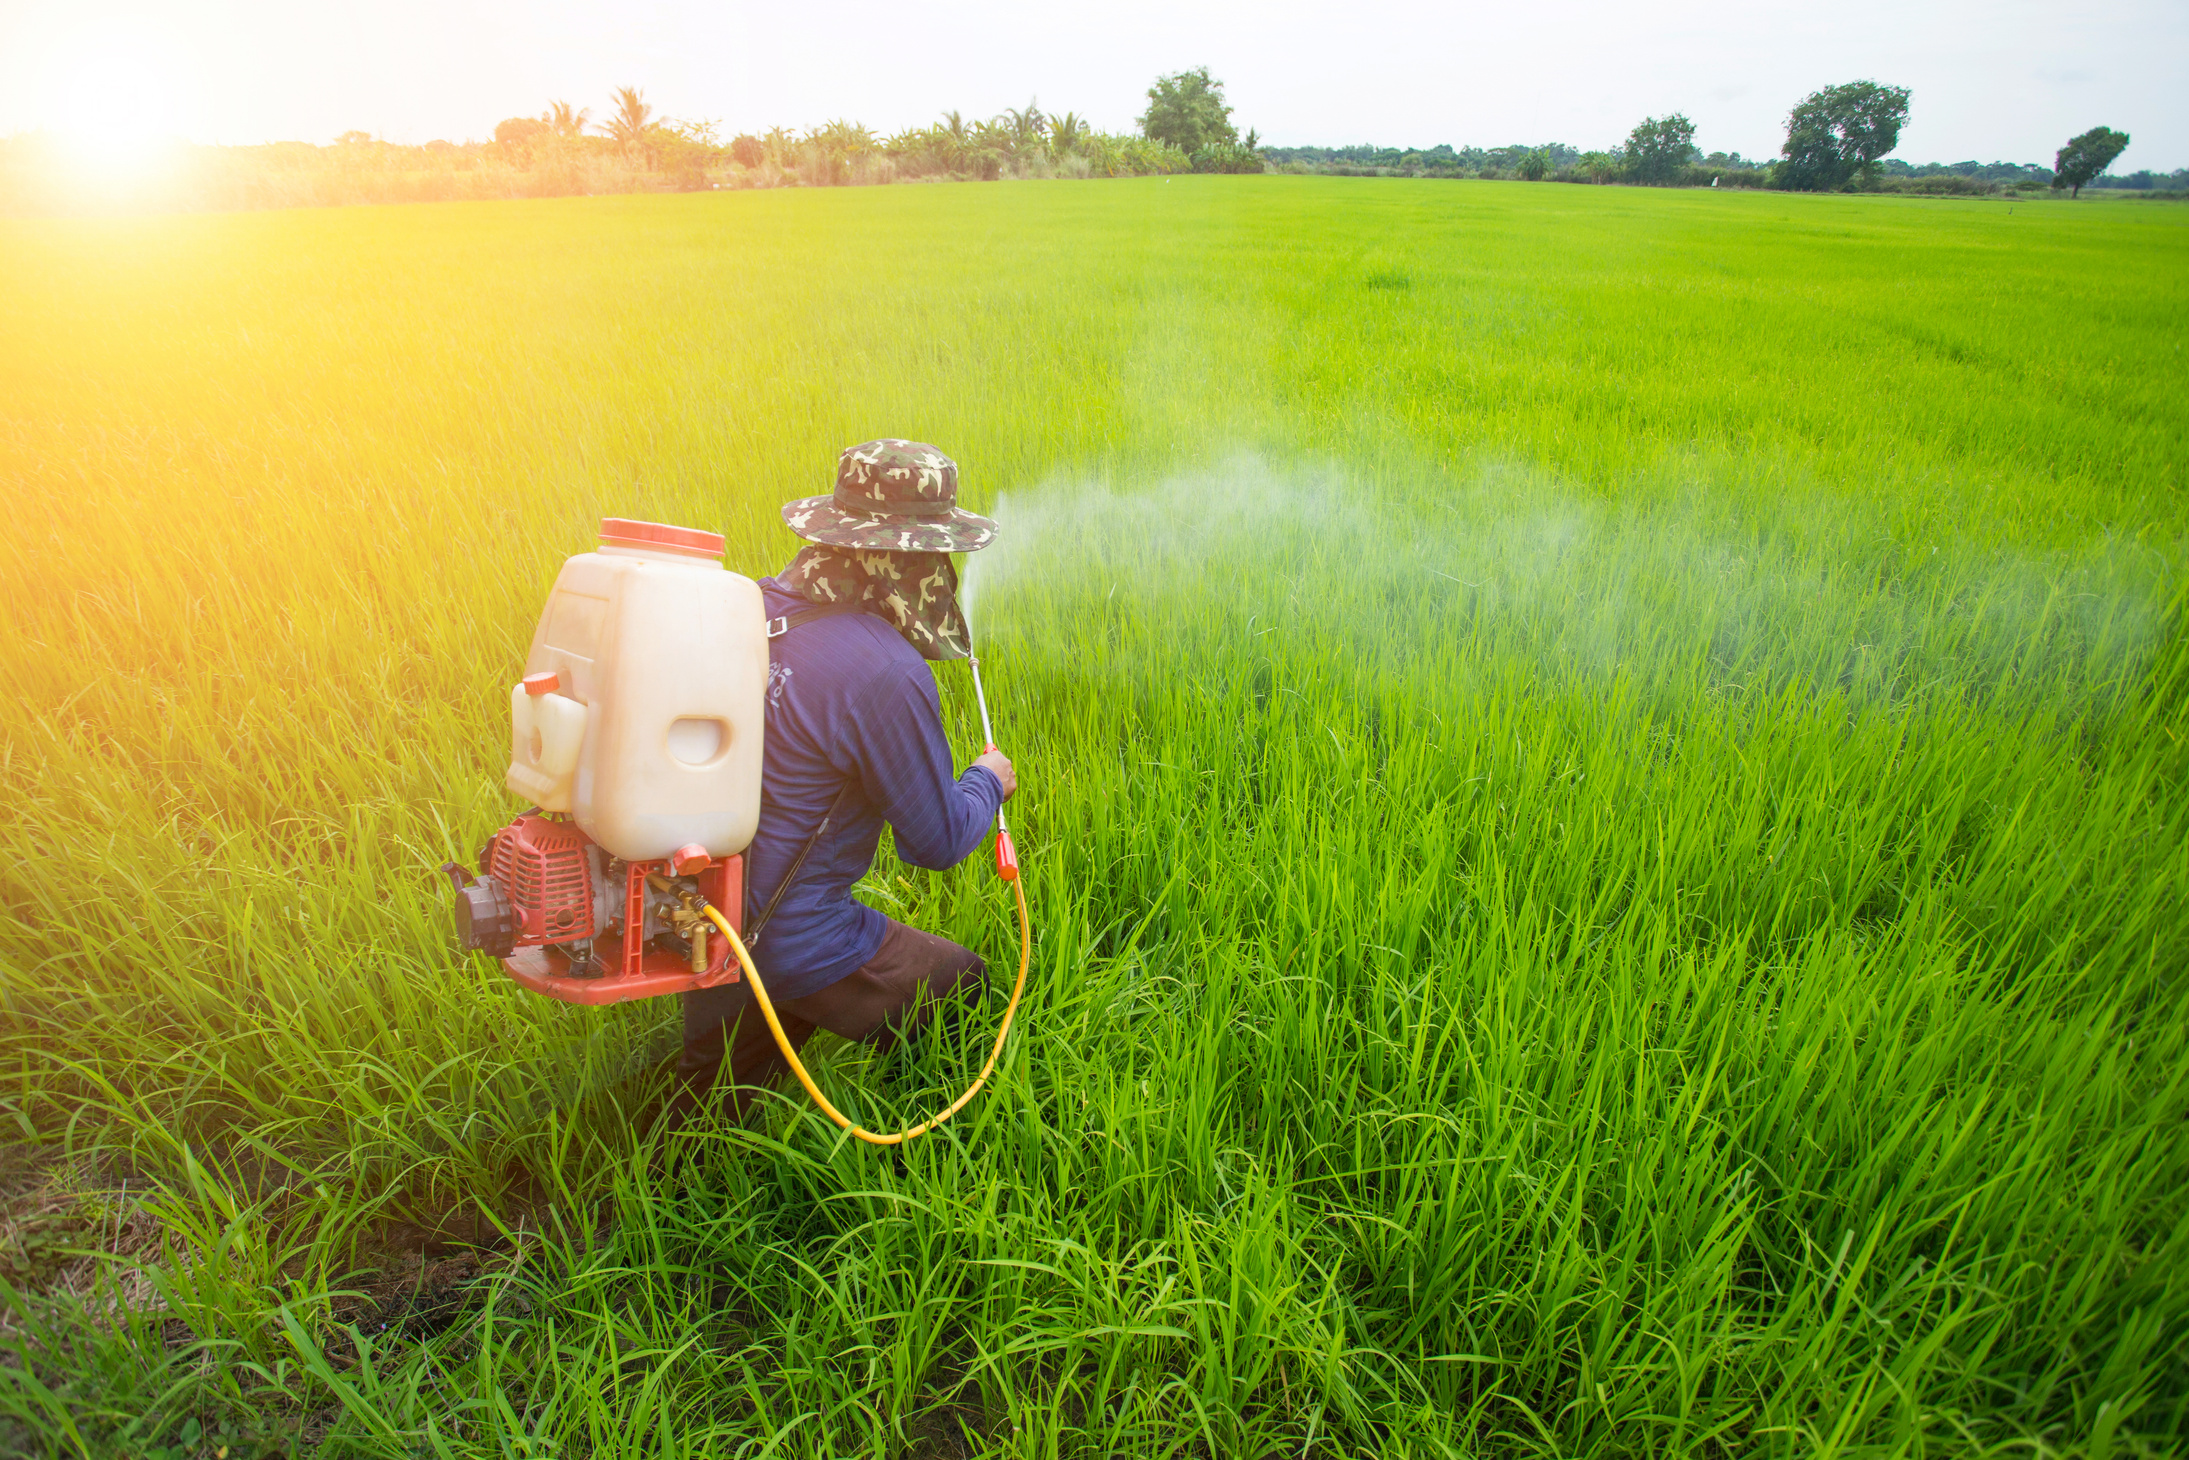 Farmer Spraying an Insecticide in a Field